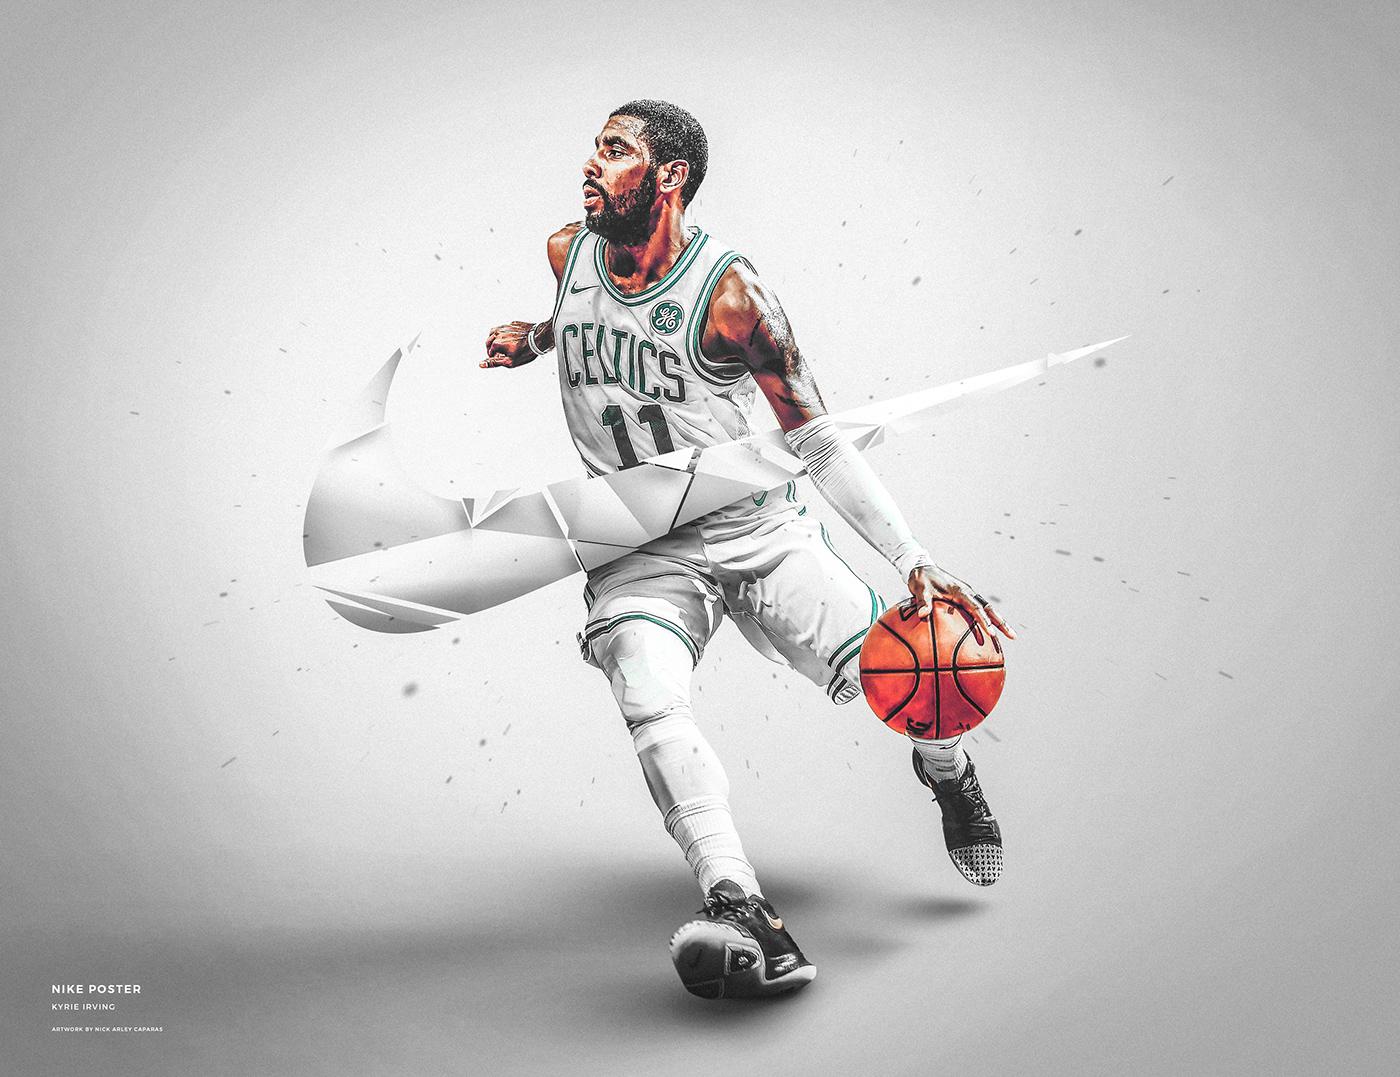 Nike Wallpaper. Kyrie Irving. PC Mac IPhone Android